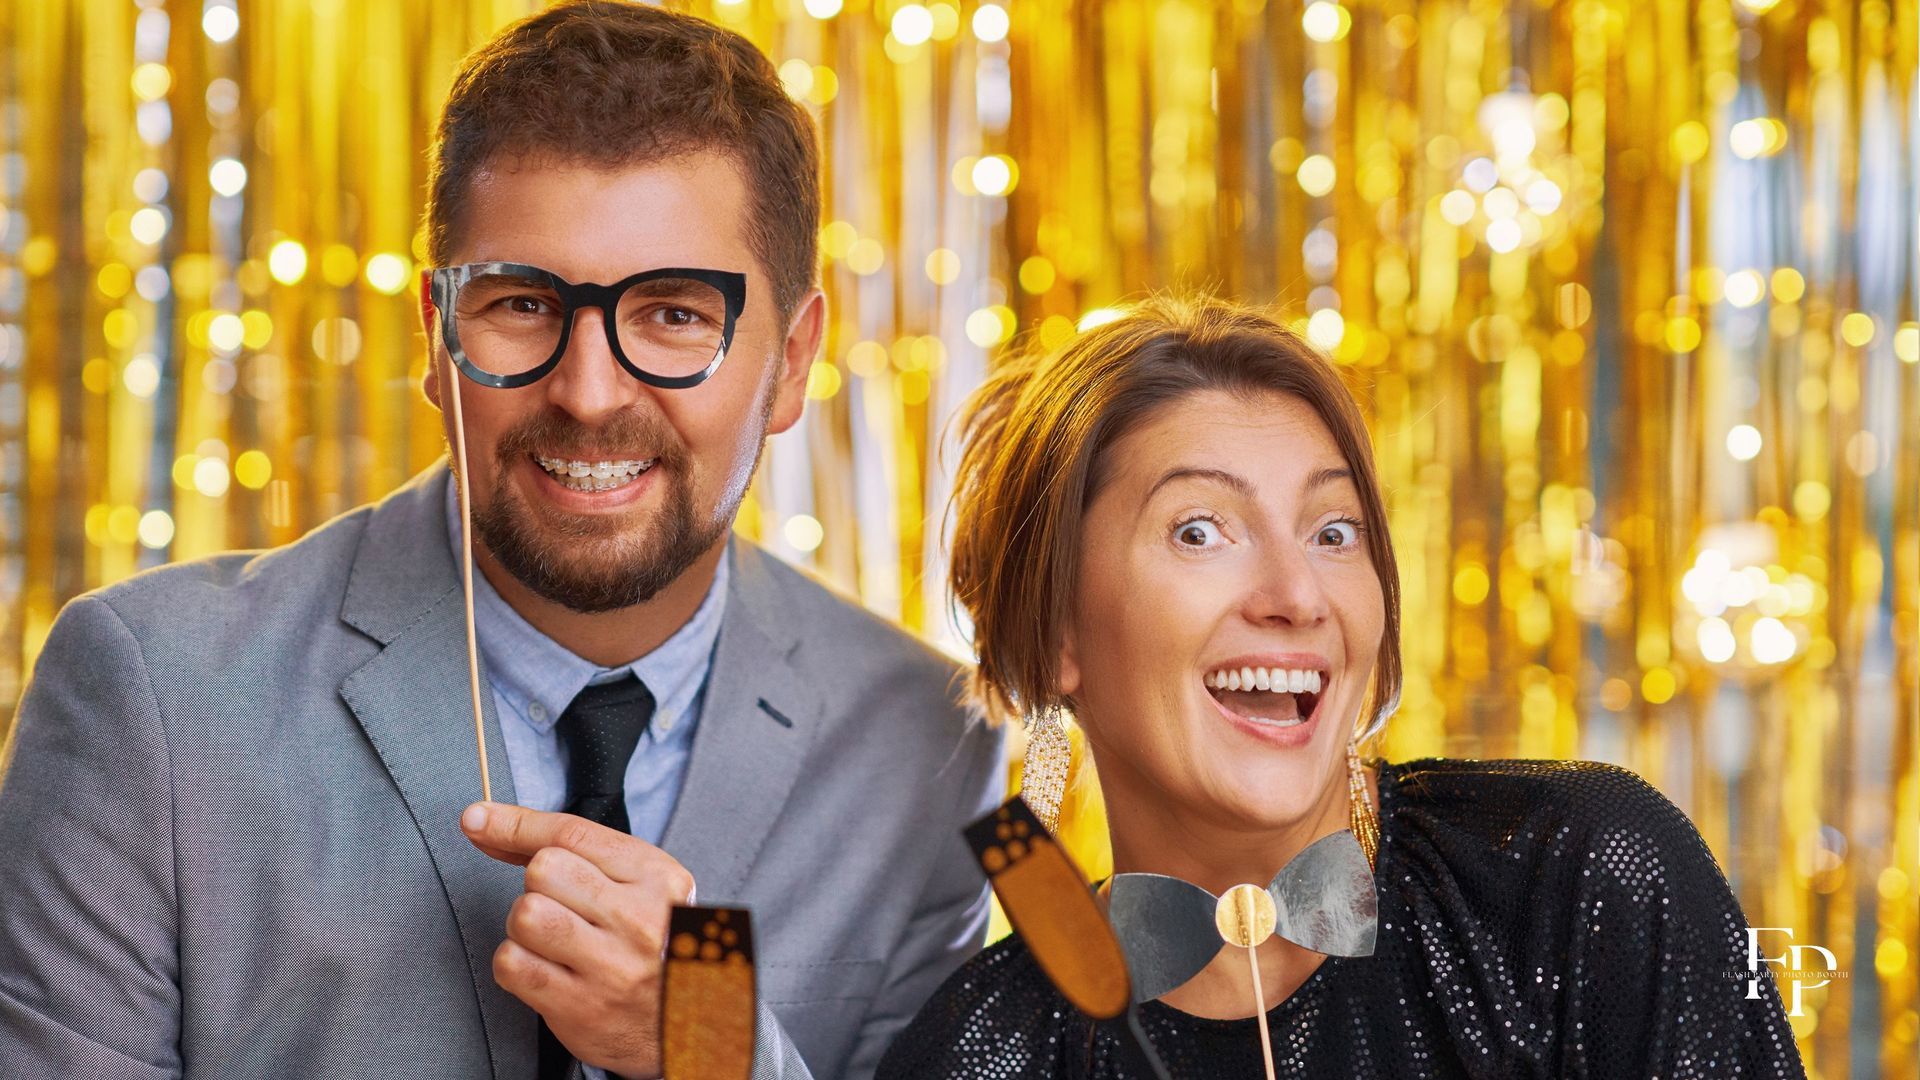 To highlight their corporate event in DFW, a woman and her partner take a break from the festivities to capture a lighthearted moment at the photo booth.